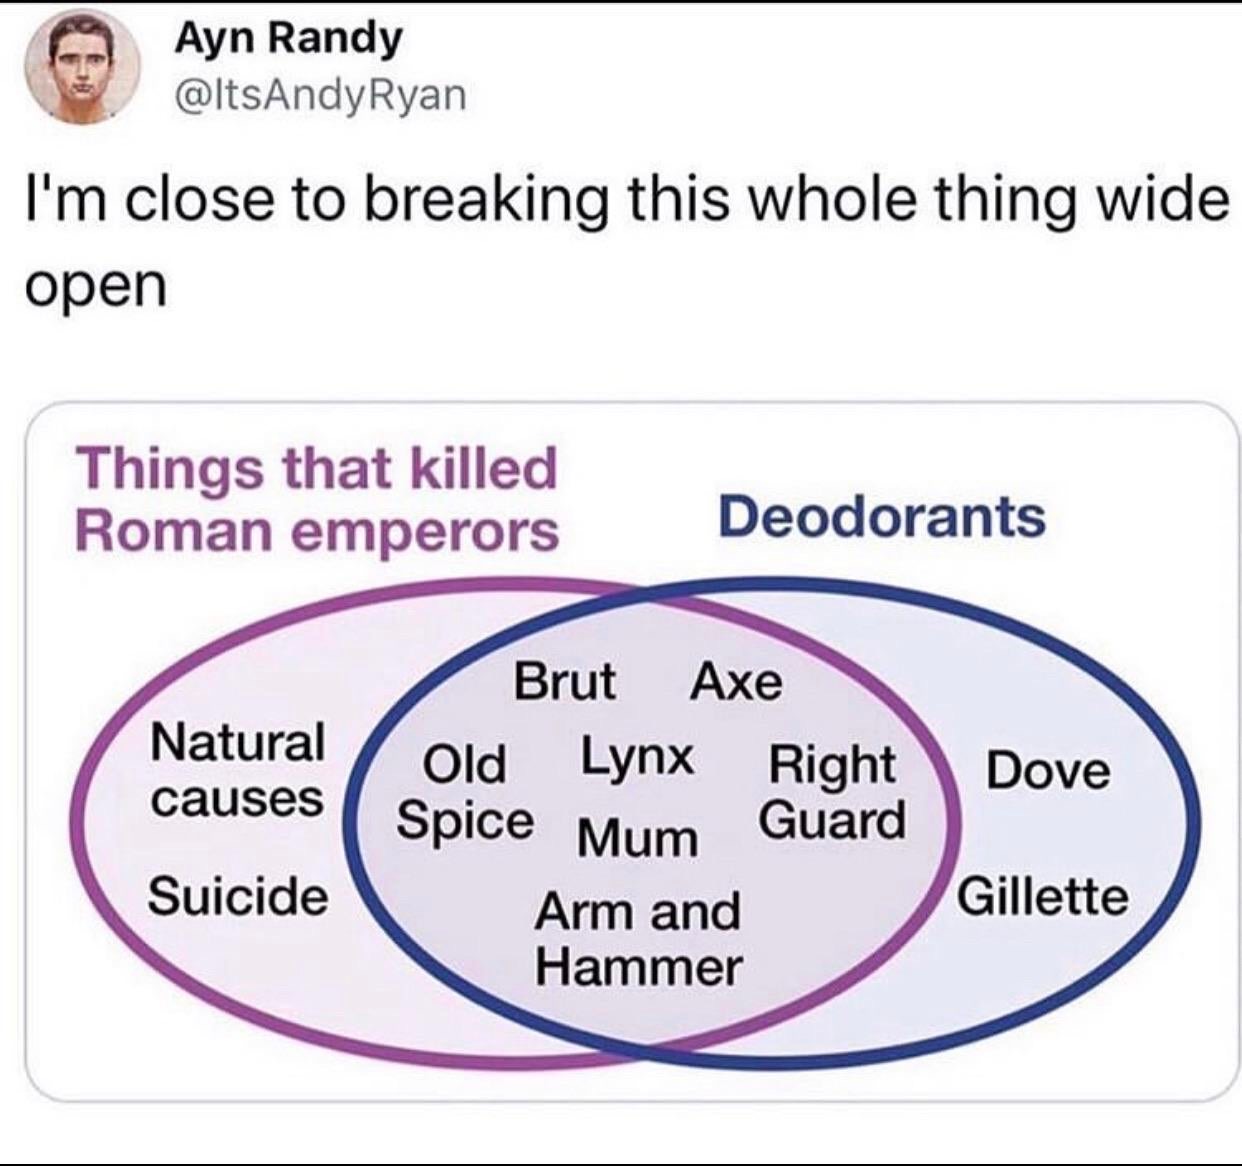 deodorant and roman deaths meme - Ayn Randy Ryan I'm close to breaking this whole thing wide open Things that killed Roman emperors Deodorants Dove Natural causes Suicide Brut Axe Old Lynx Right Spice Mum Guard Arm and Hammer Gillette